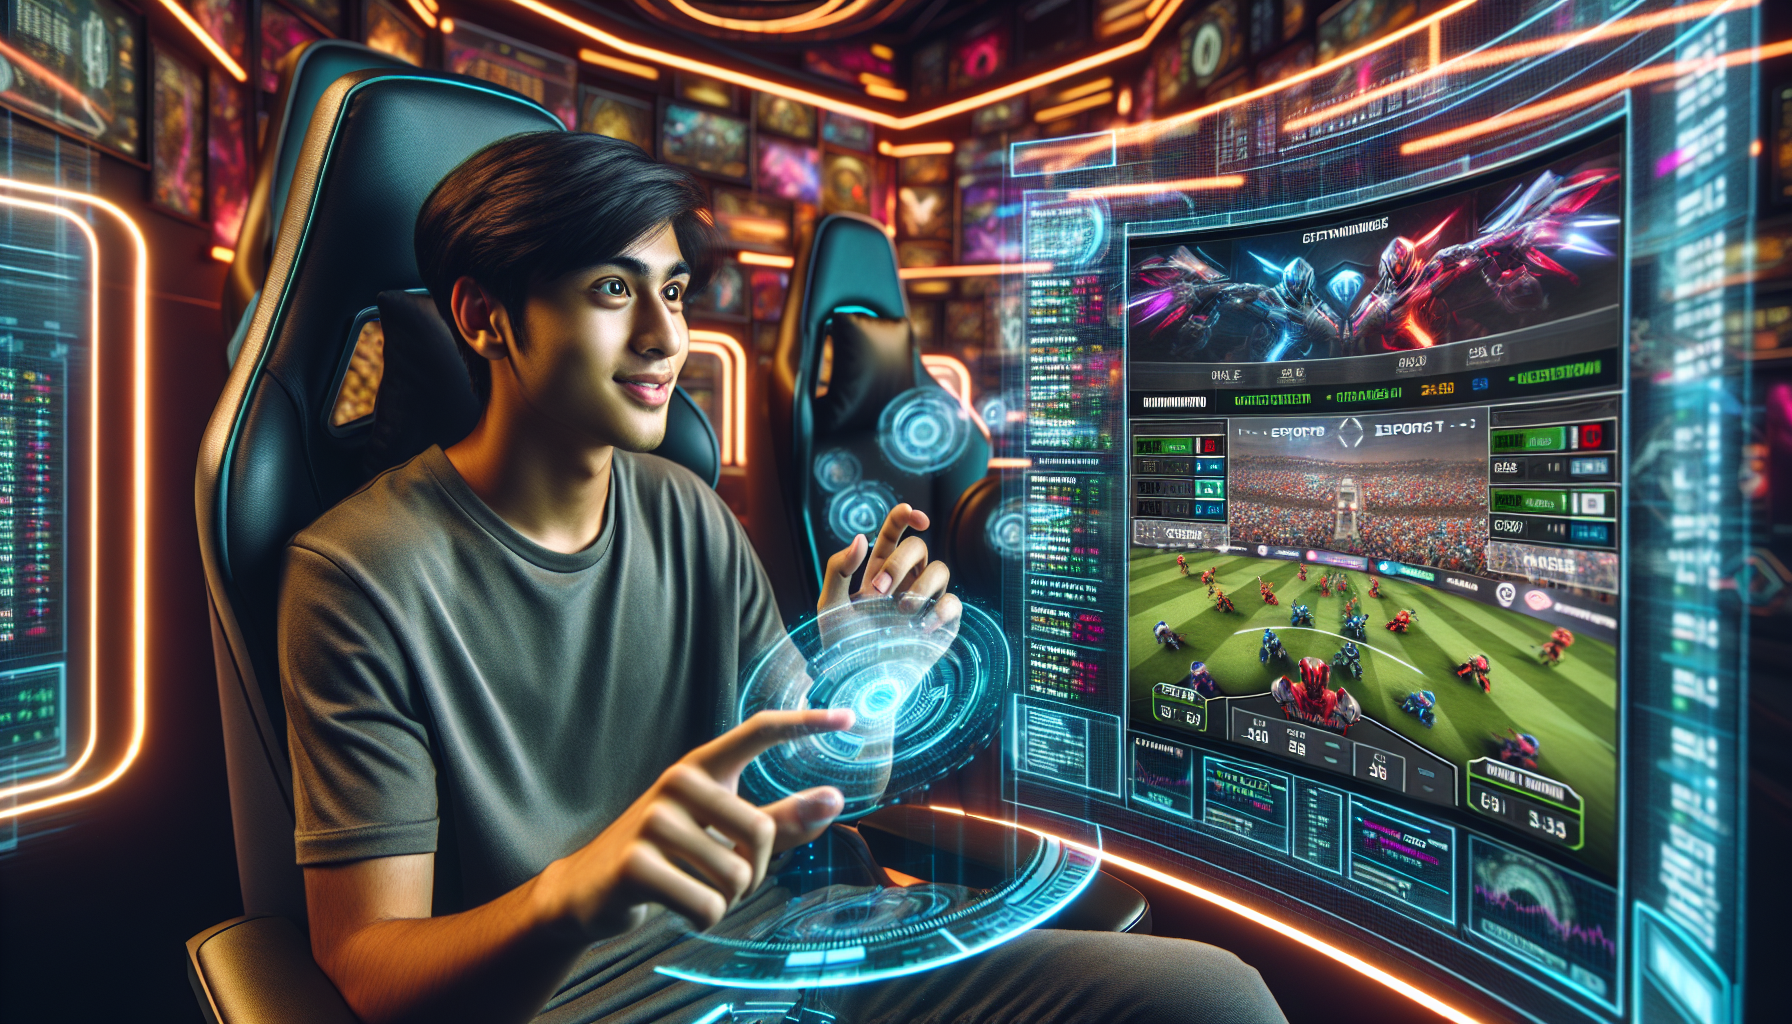 Illustration of a person engaging in live esports betting with interactive features